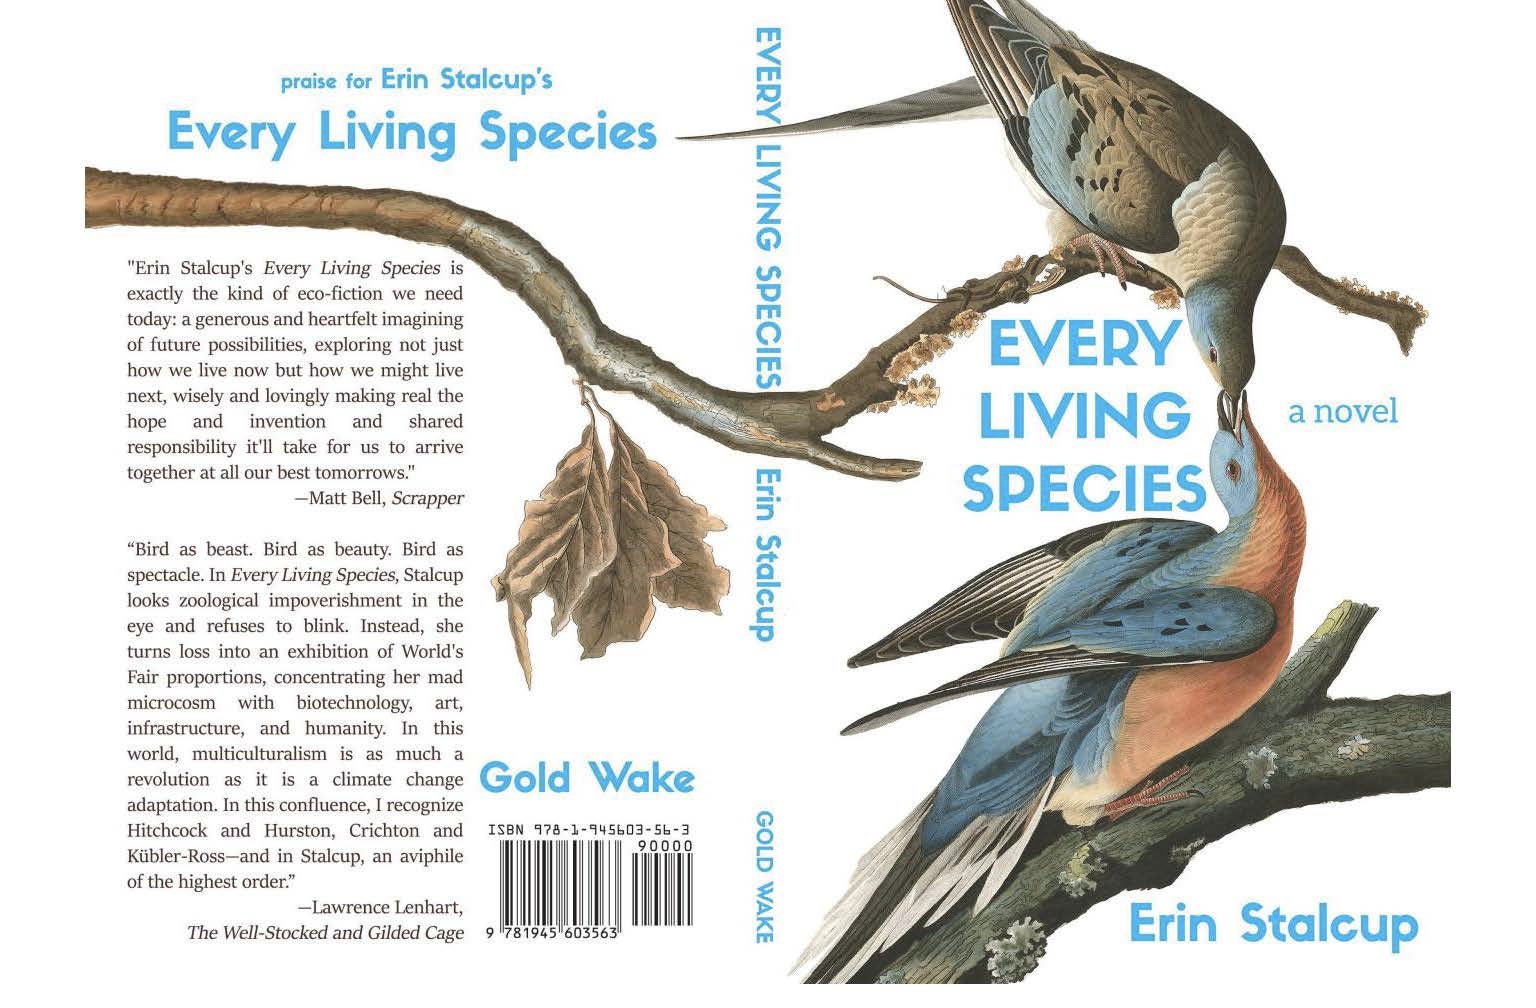 The cover of Erin's novel, Every Living Species.